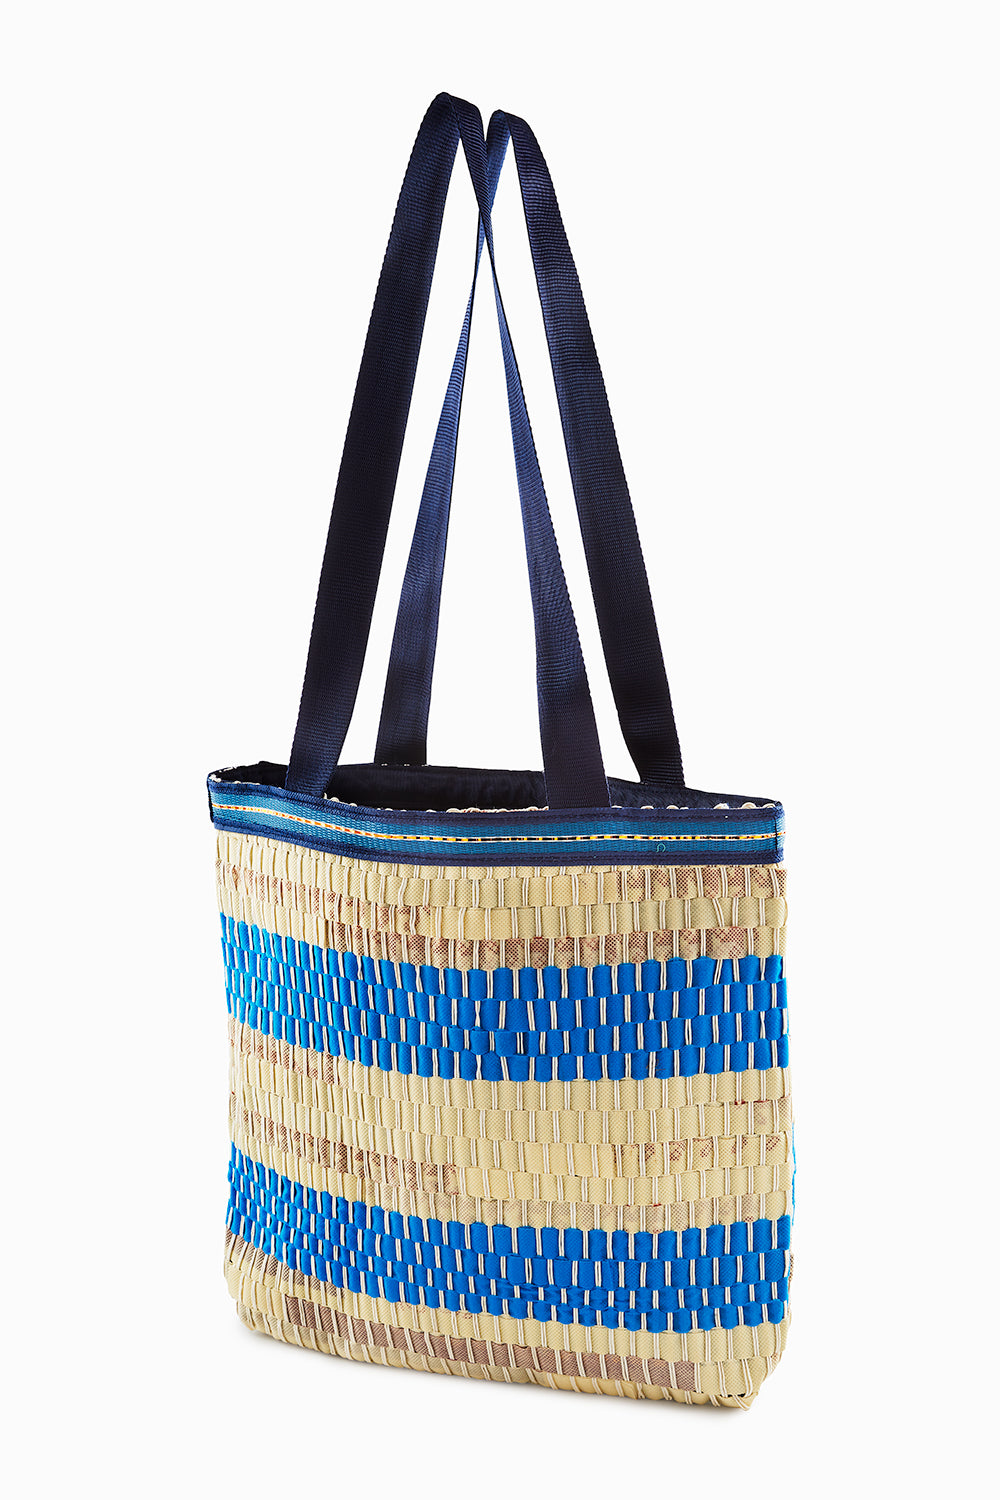 White & Lapis Blue Colored Recycled Non-Woven Fabric Bag